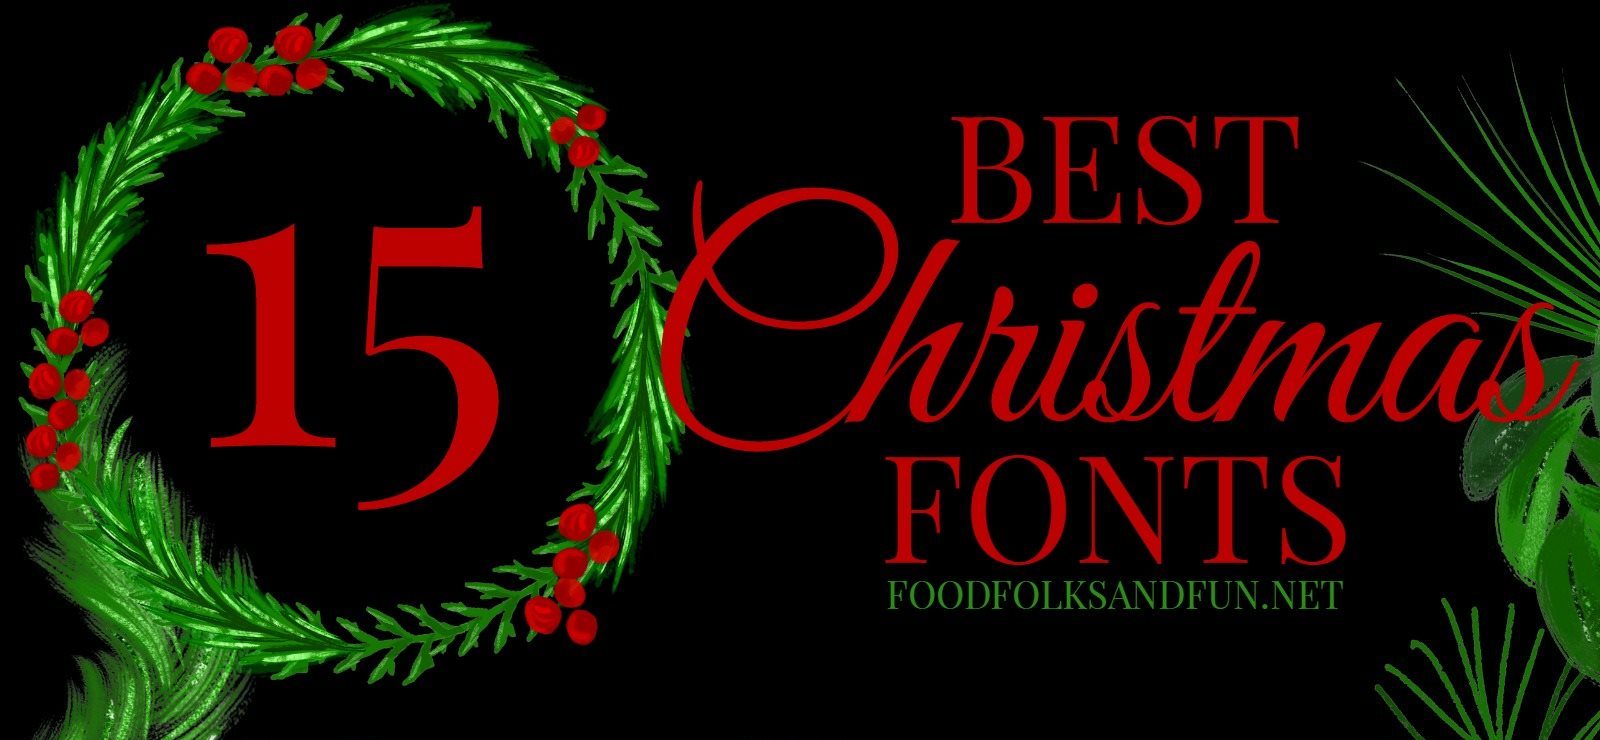 15 Best FREE Christmas Fonts • Food Folks and Fun